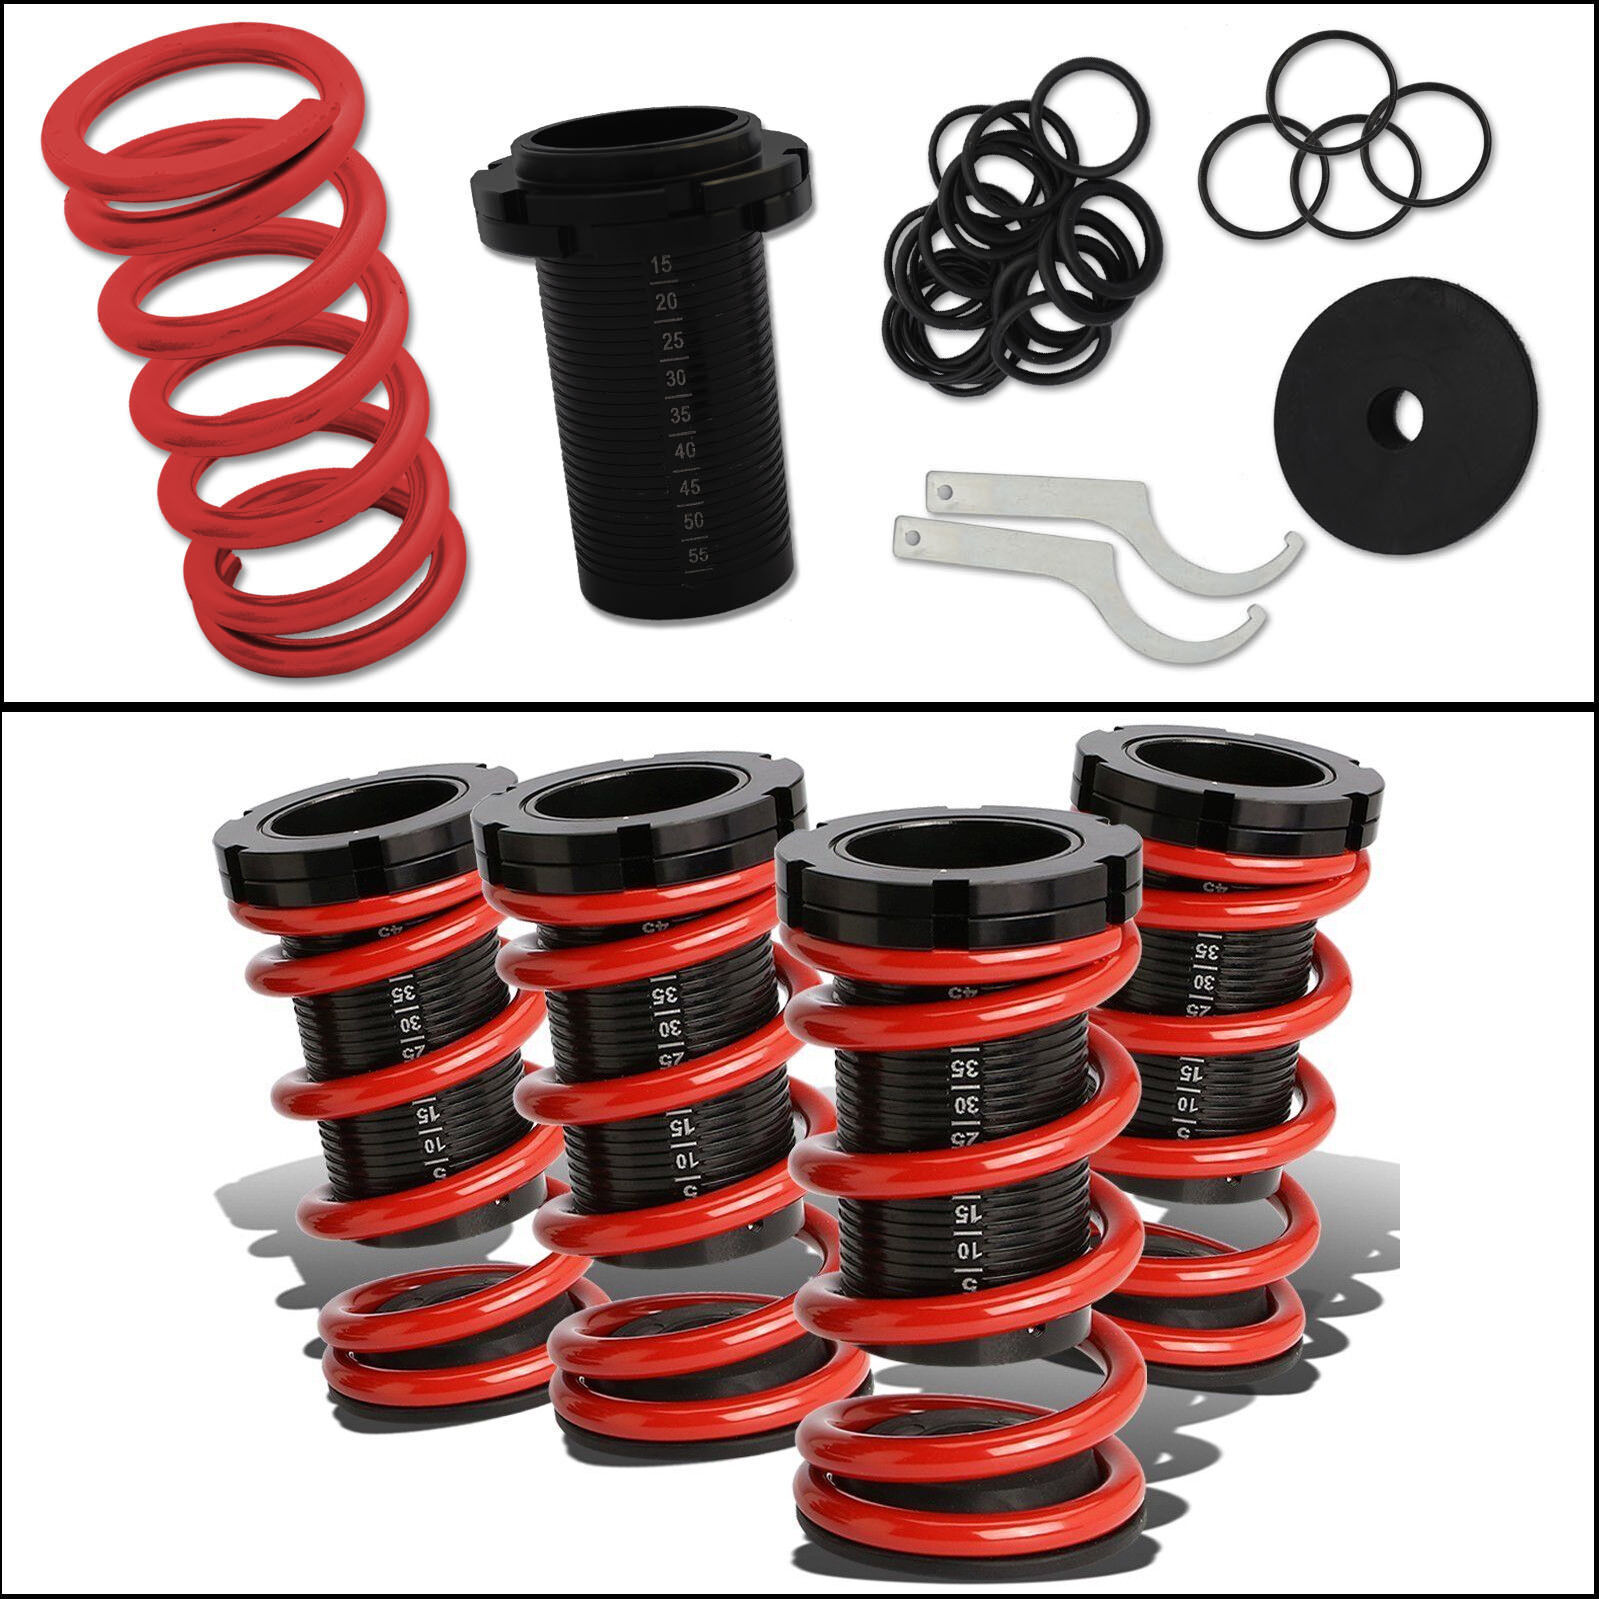 RED AROSPEED RACING ADJUSTABLE COILOVERS KIT FOR 88-91 HONDA CIVIC D15 D16 EF9